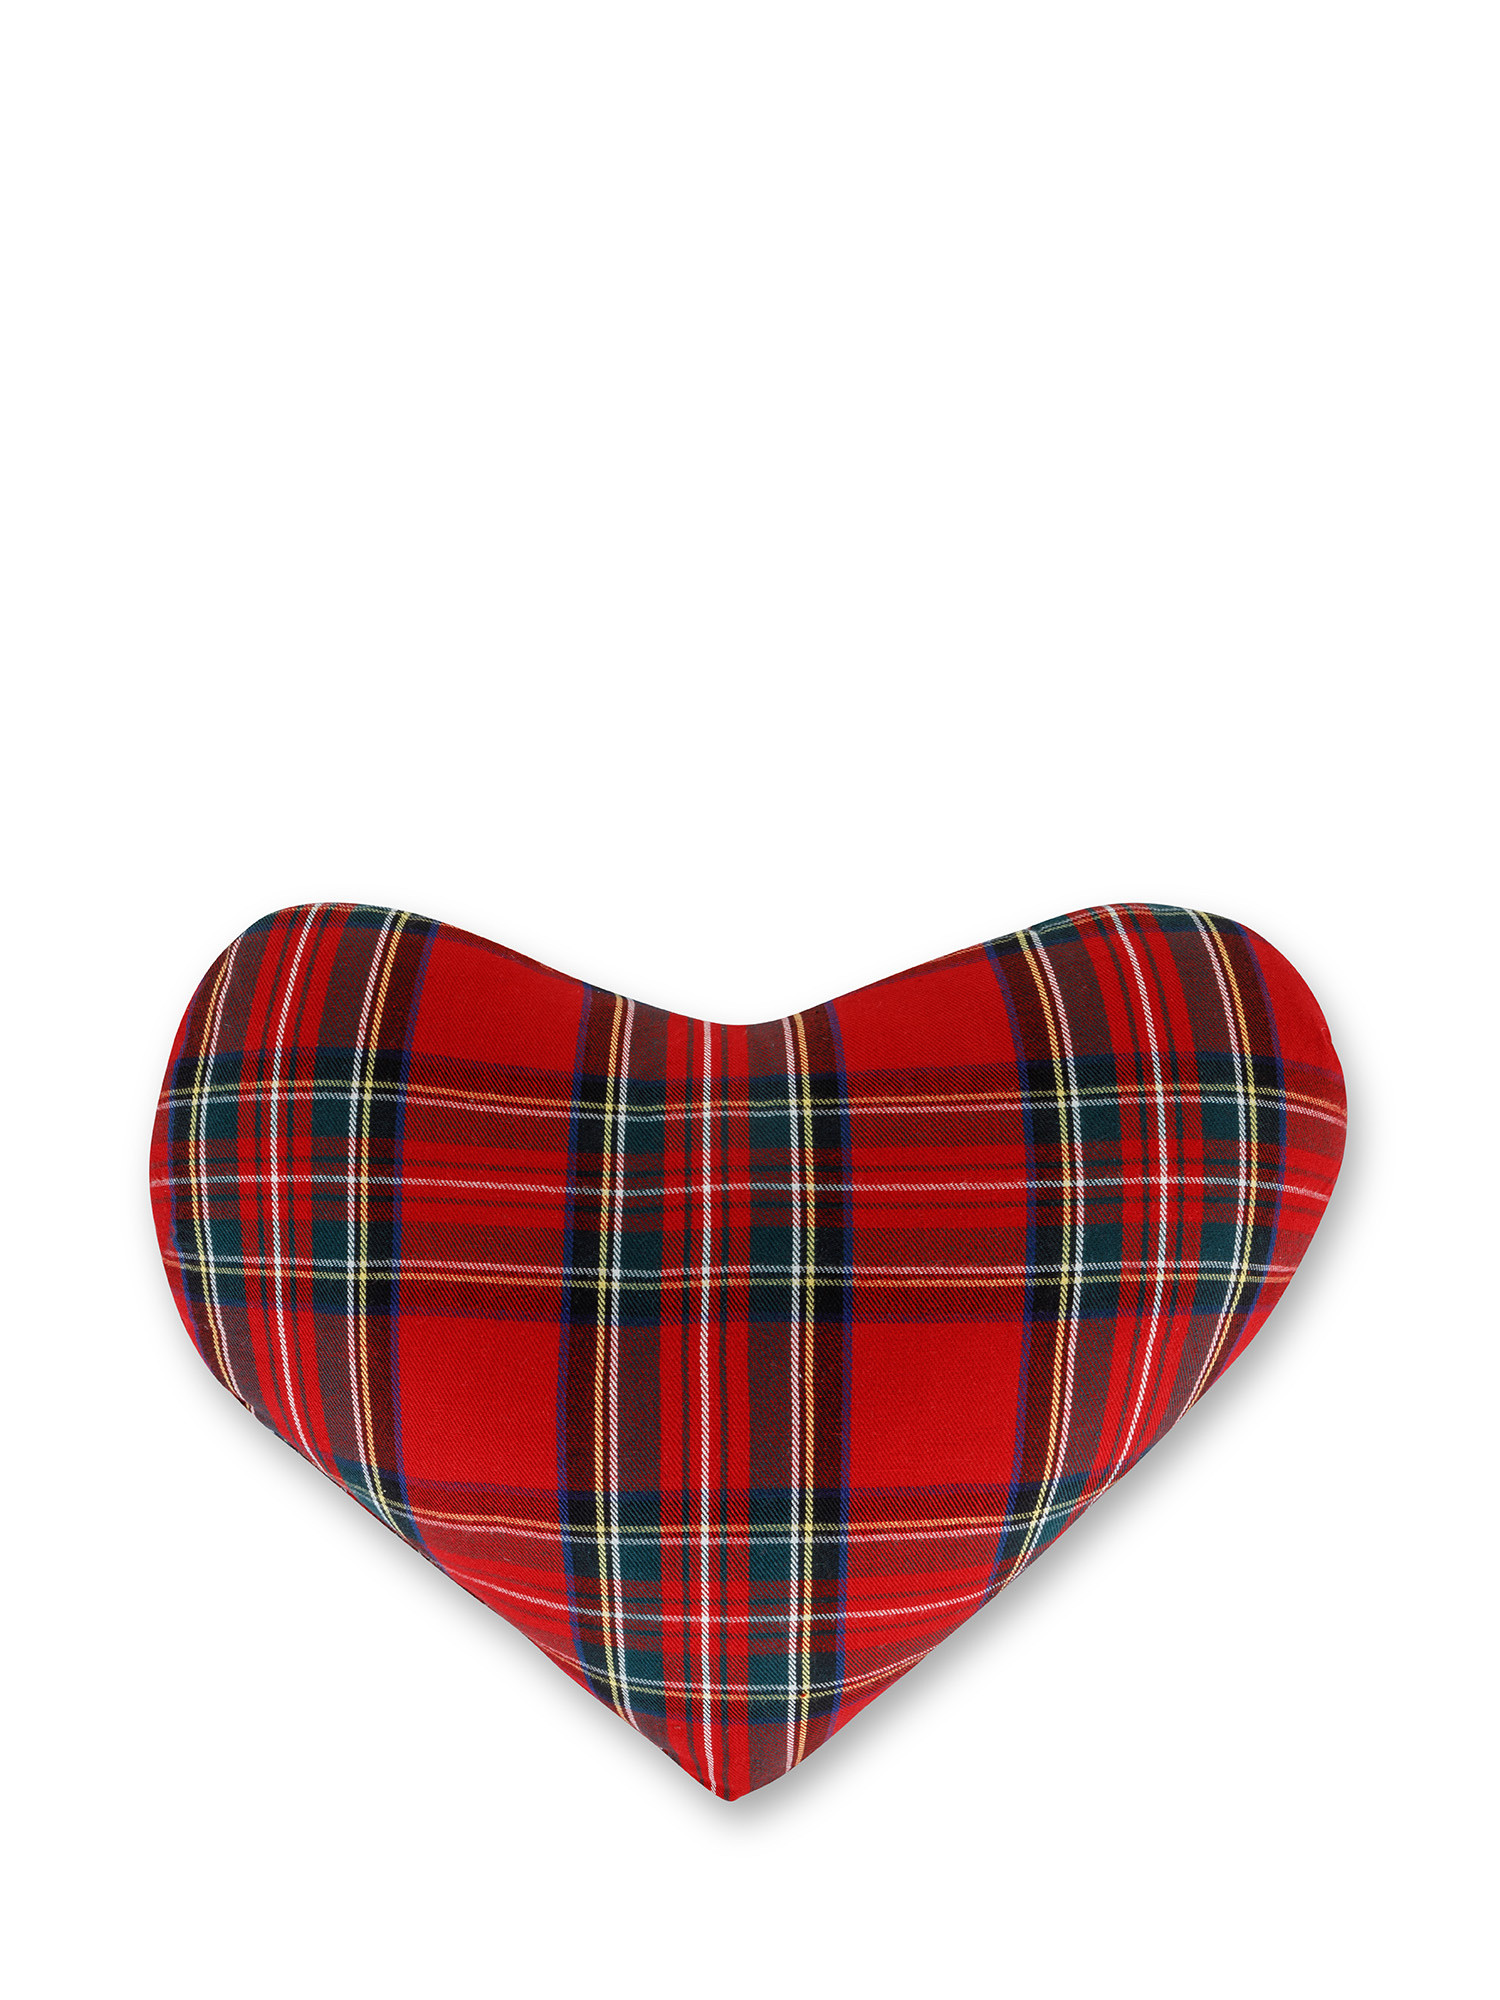 Cuscino a cuore in tartan, Rosso, large image number 0